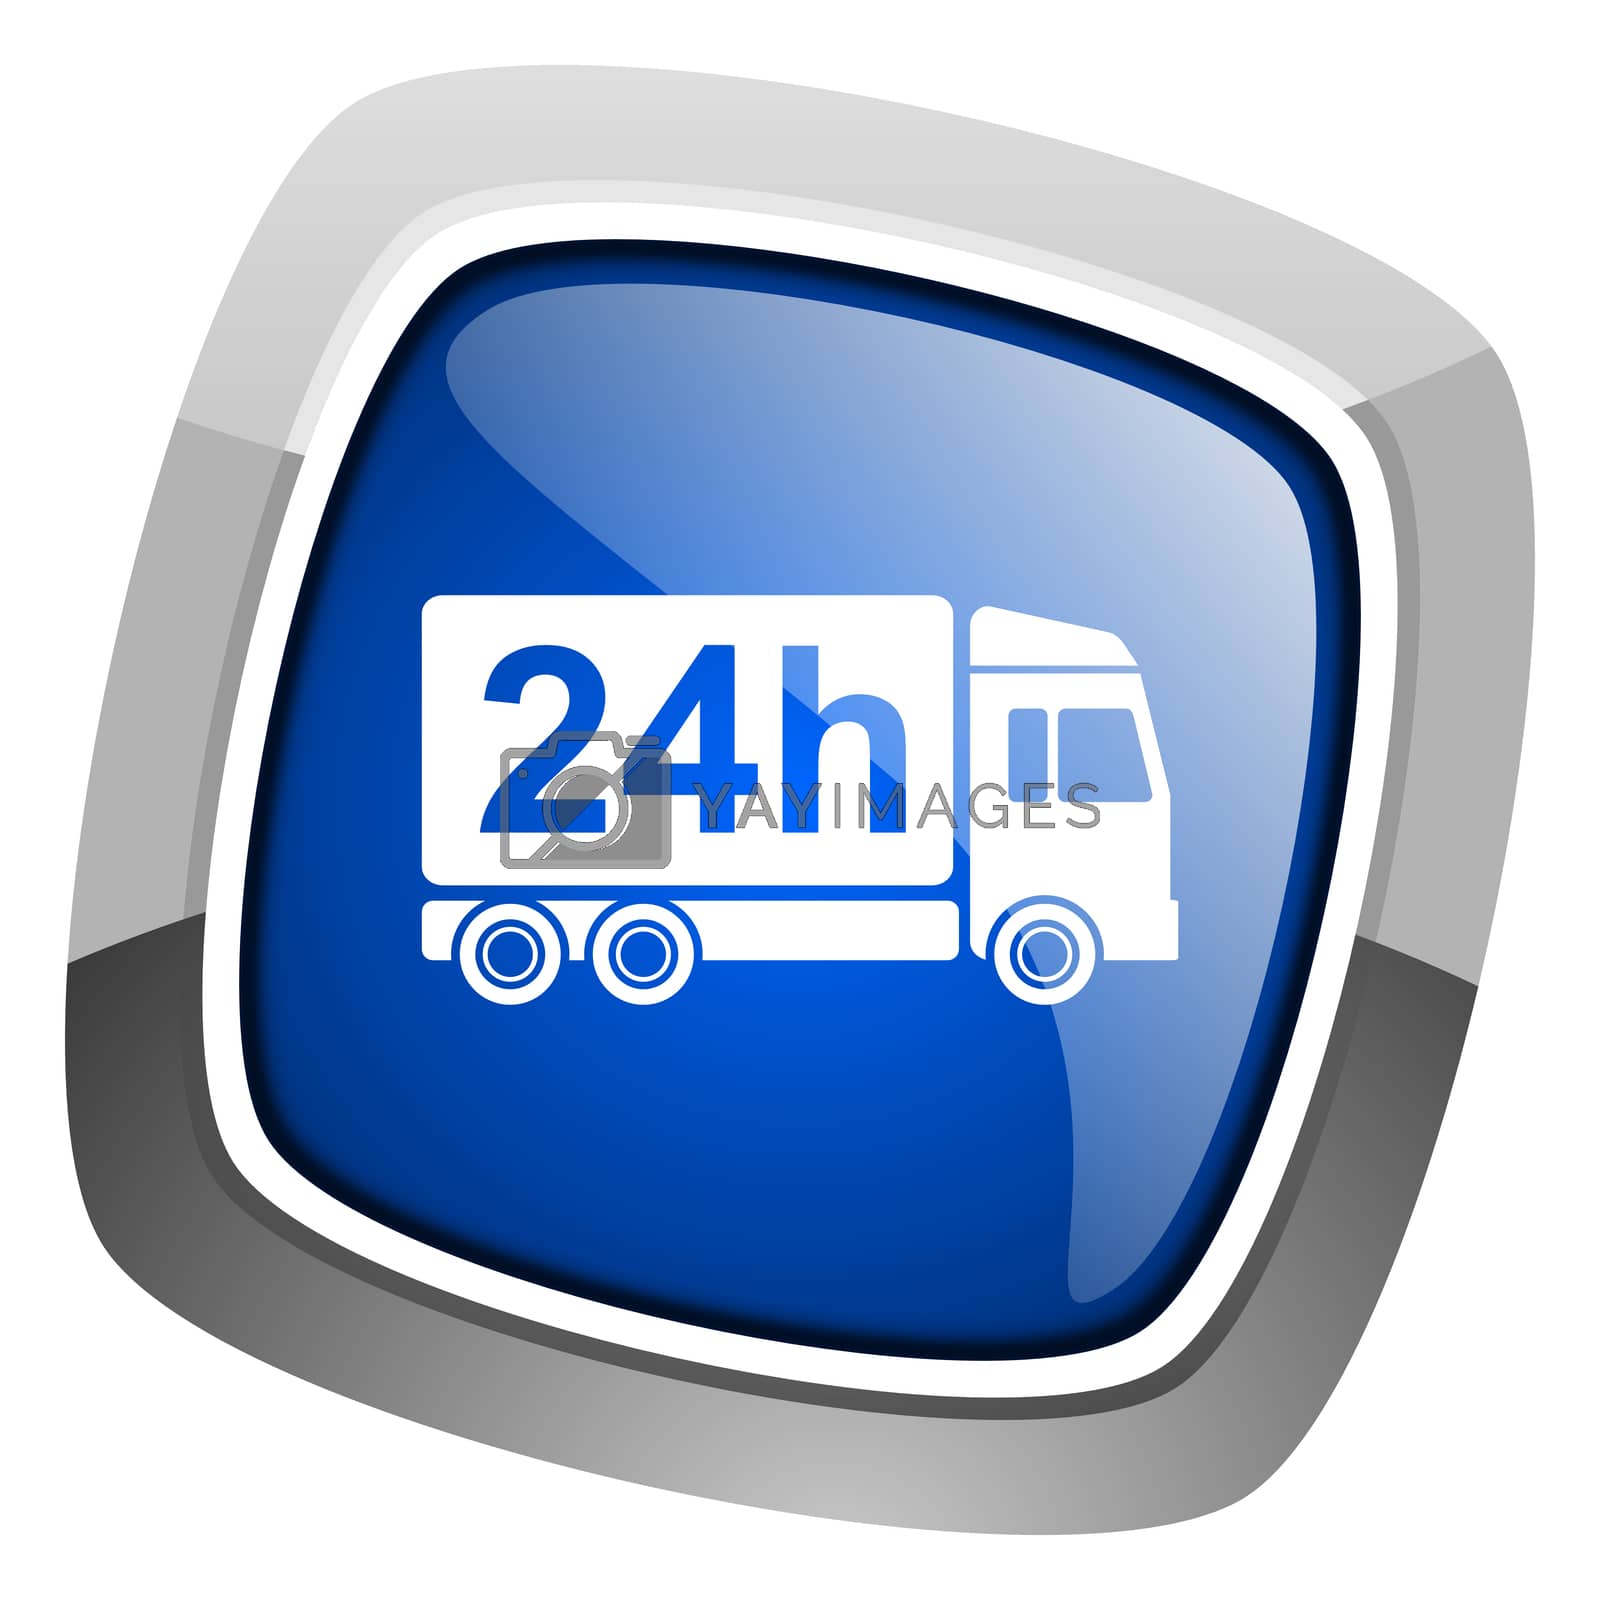 Royalty free image of delivery 24h icon by alexwhite